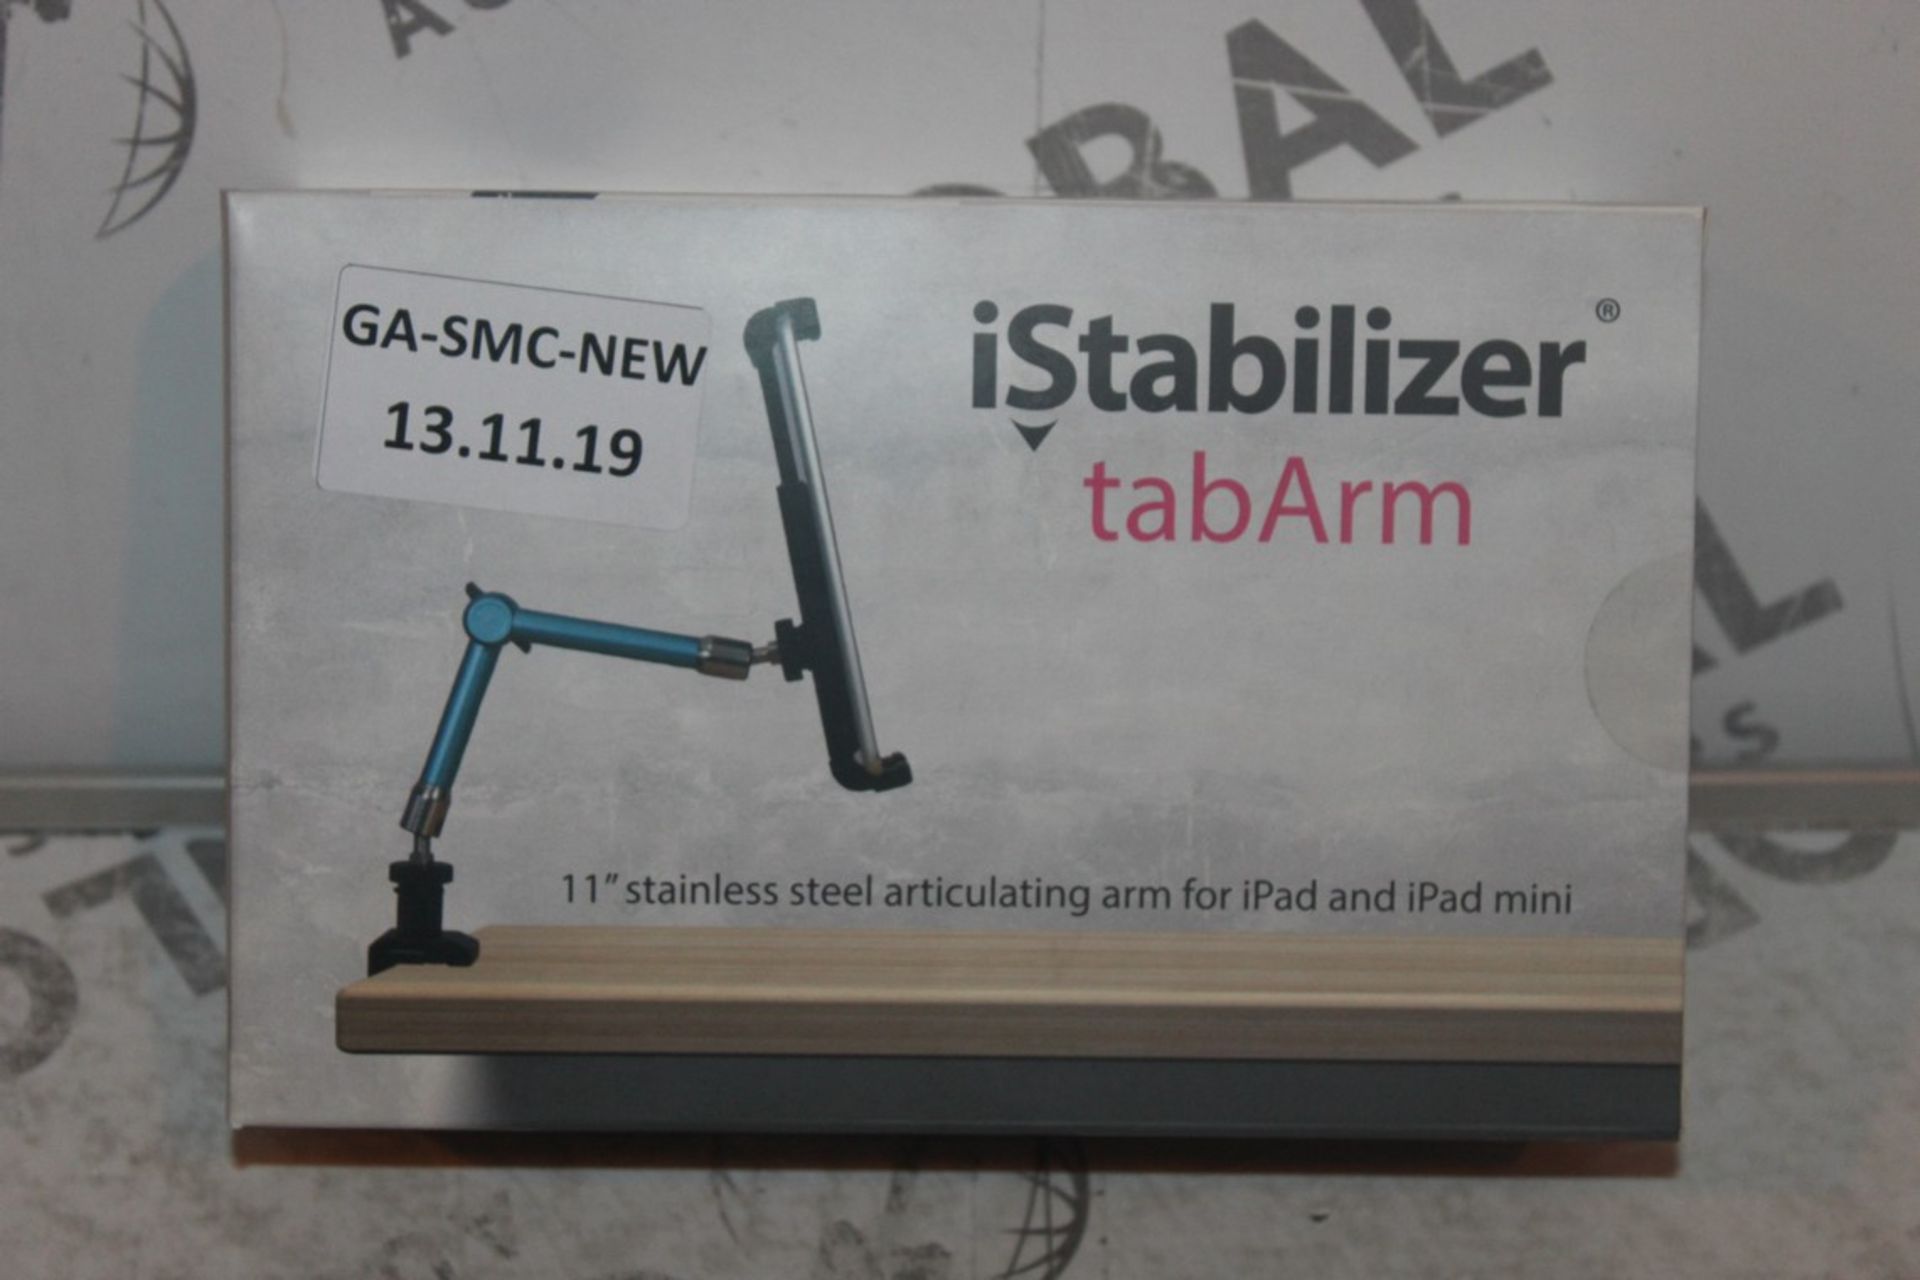 Lot to Contain 2 Boxed Brand New Istabiliser Tab Arm 11Inch Stainless Steel Articulating Arms for